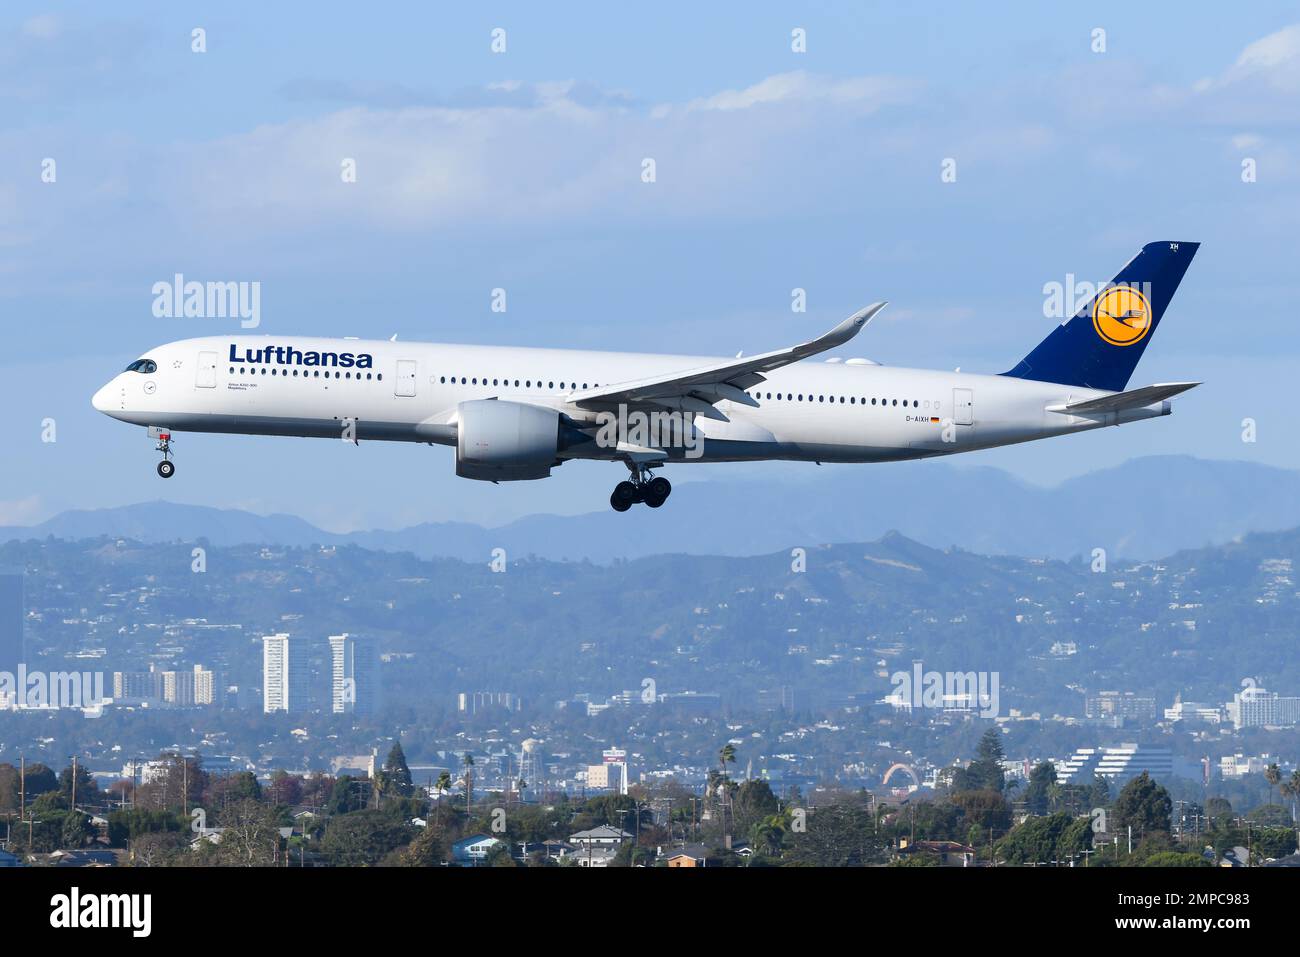 Lufthansa Airlines Airbus A350-900 aircraft landing. Airplane A350-900 of Deutsche Lufthansa flying. Stock Photo